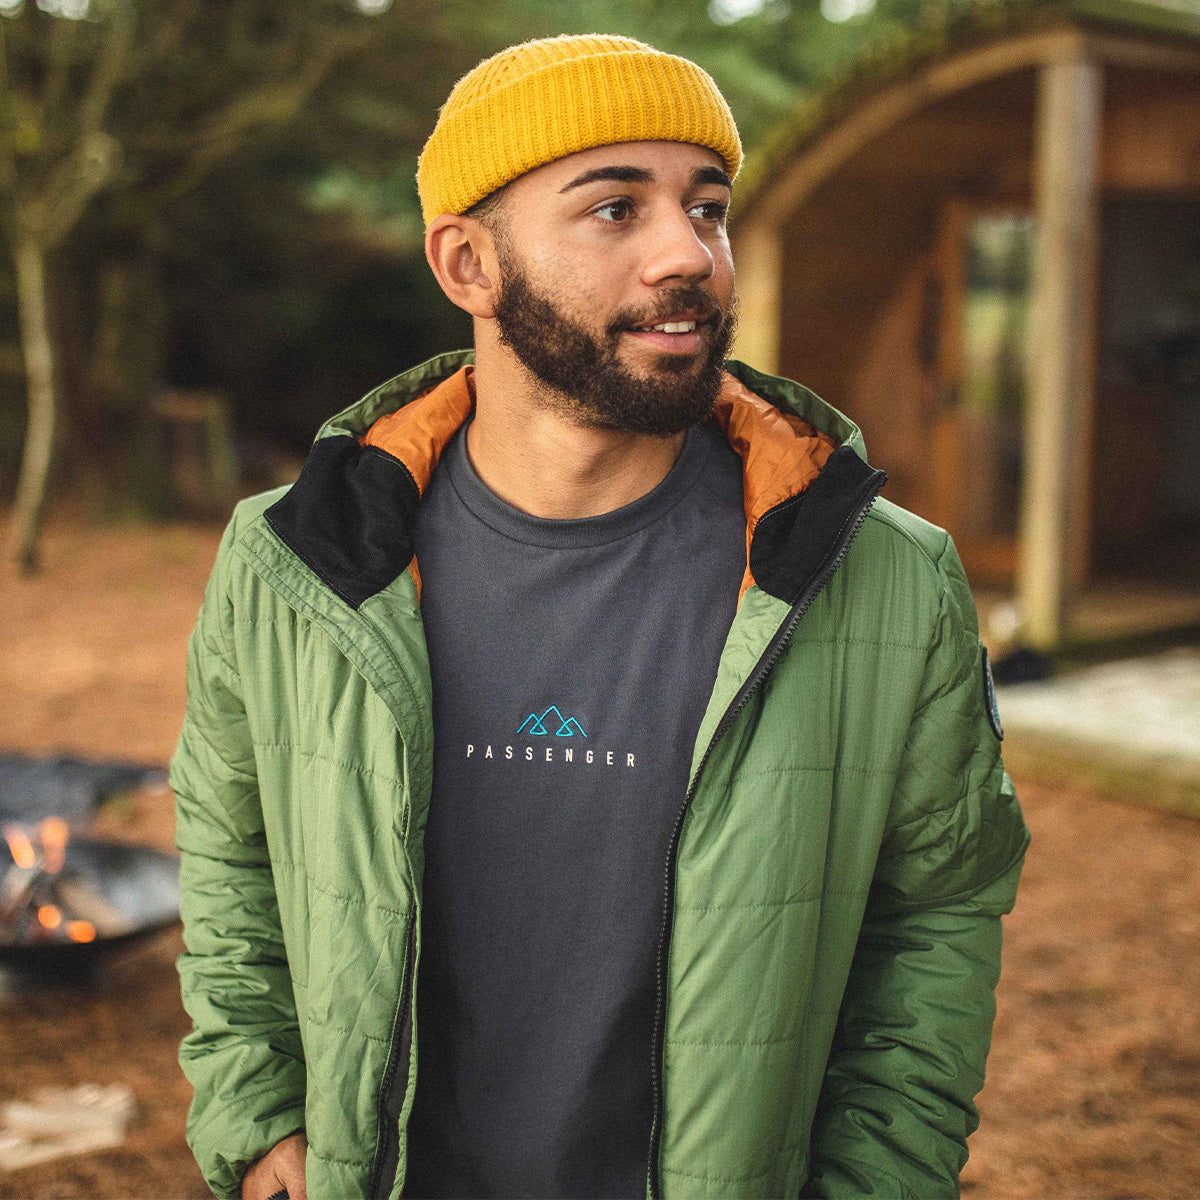 Patrol Recycled Insulated Jacket - Vineyard Green